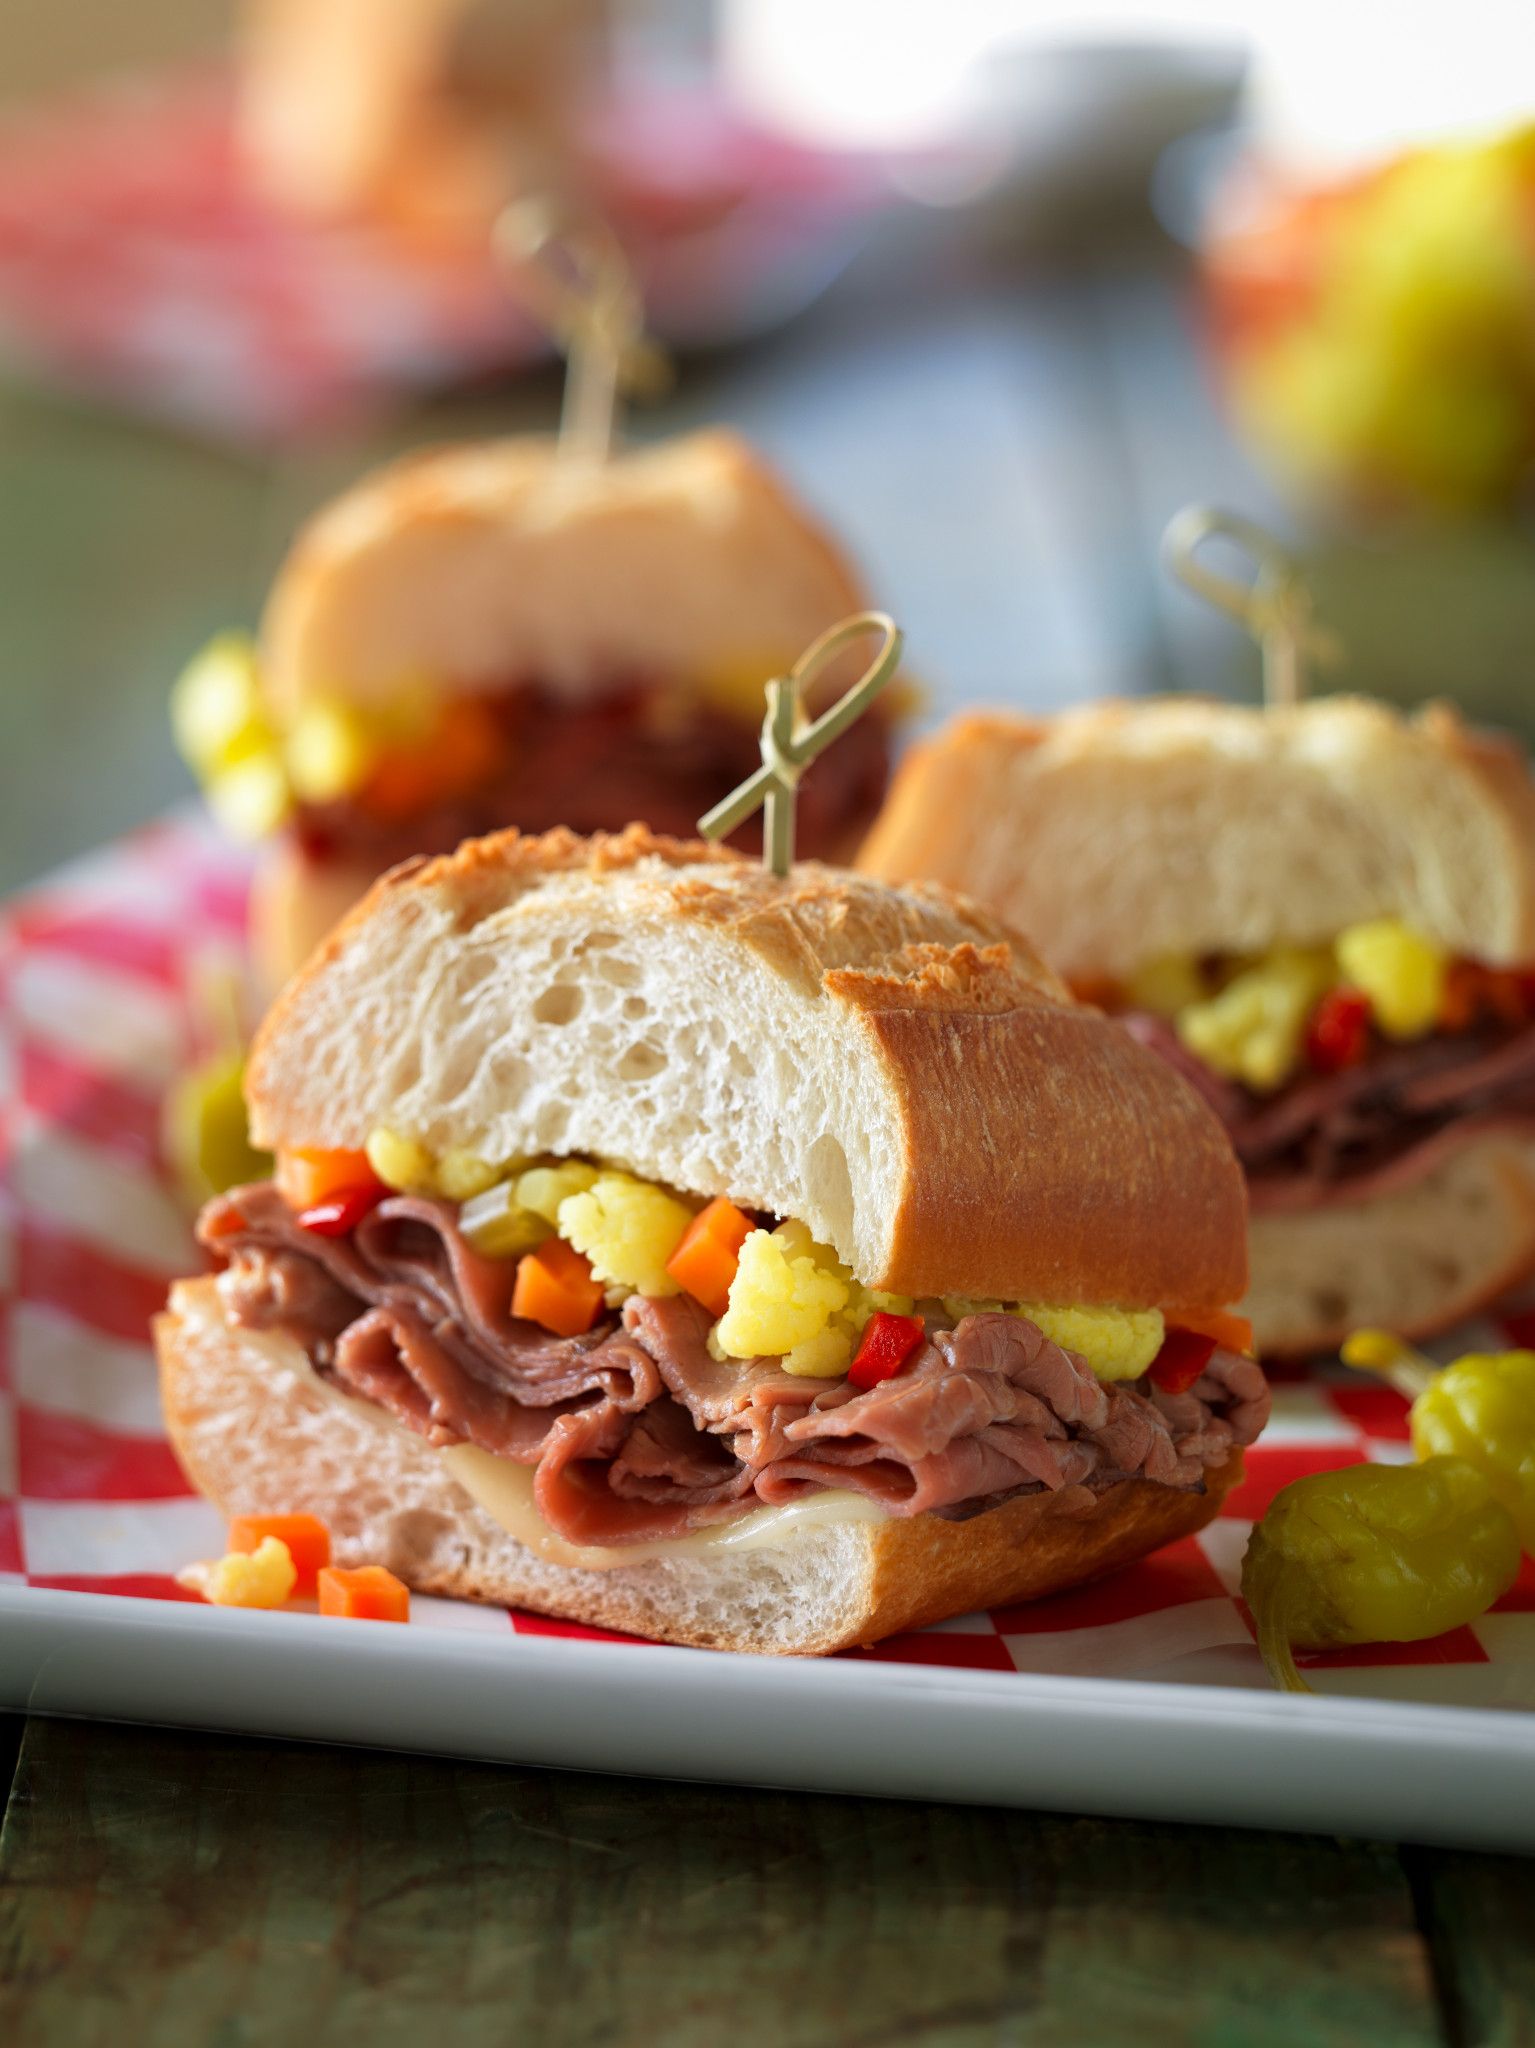 Chicago-Style Italian Beef Sandwiches | Beef Loving Texans